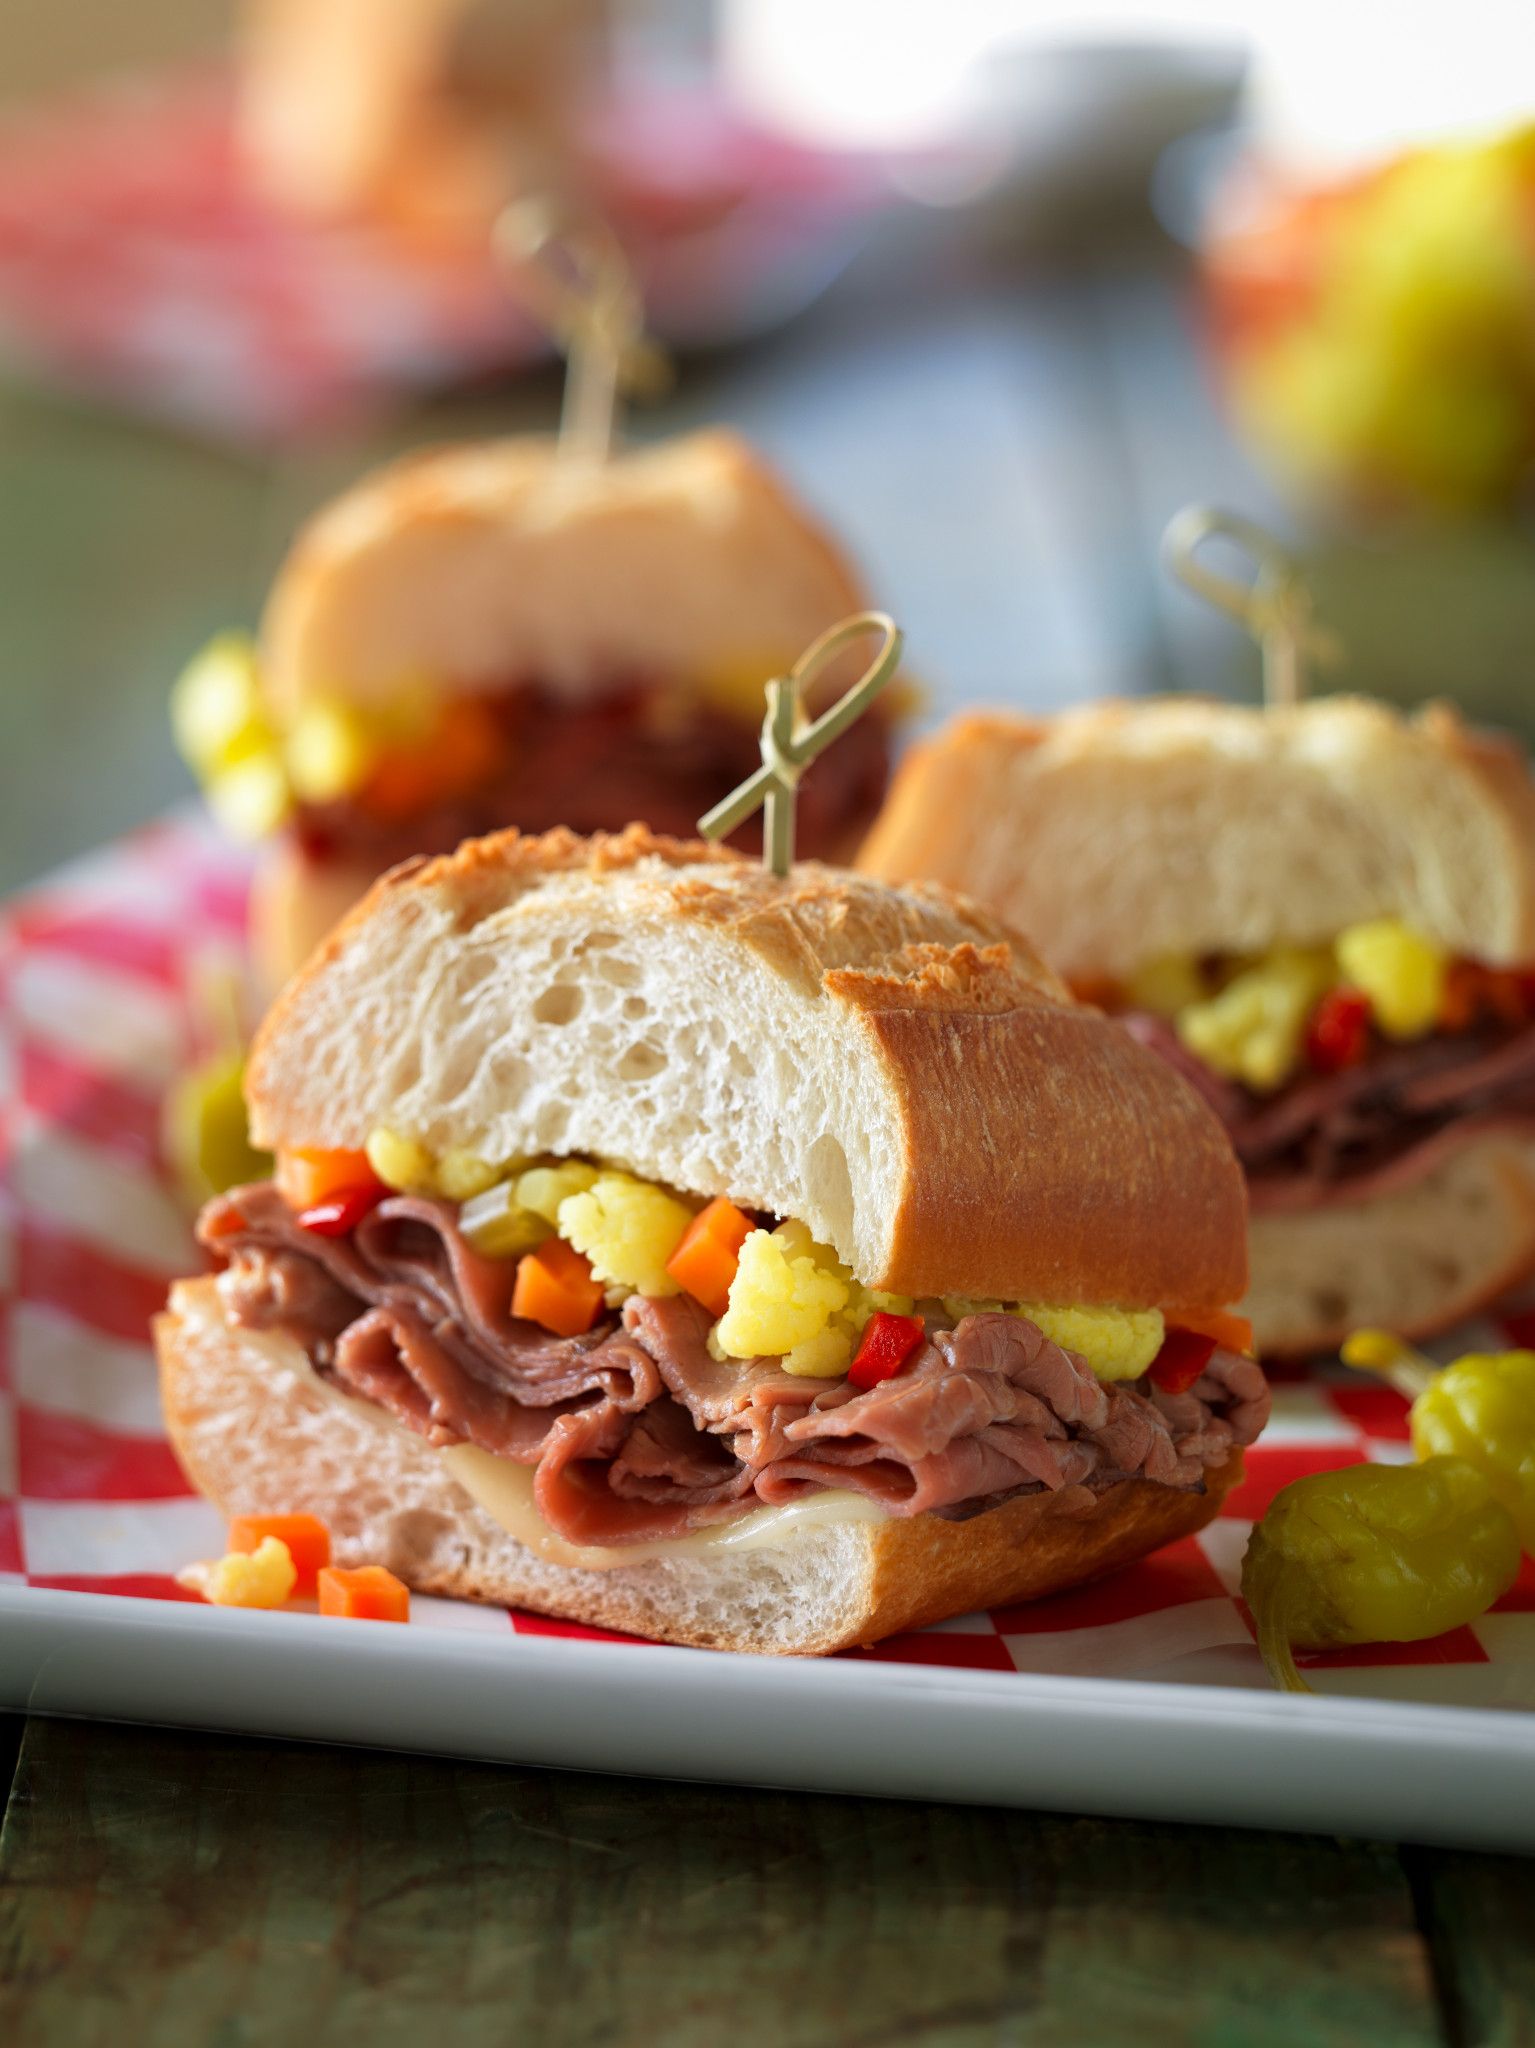 Chicago-Style Italian Beef Sandwiches | Beef Loving Texans